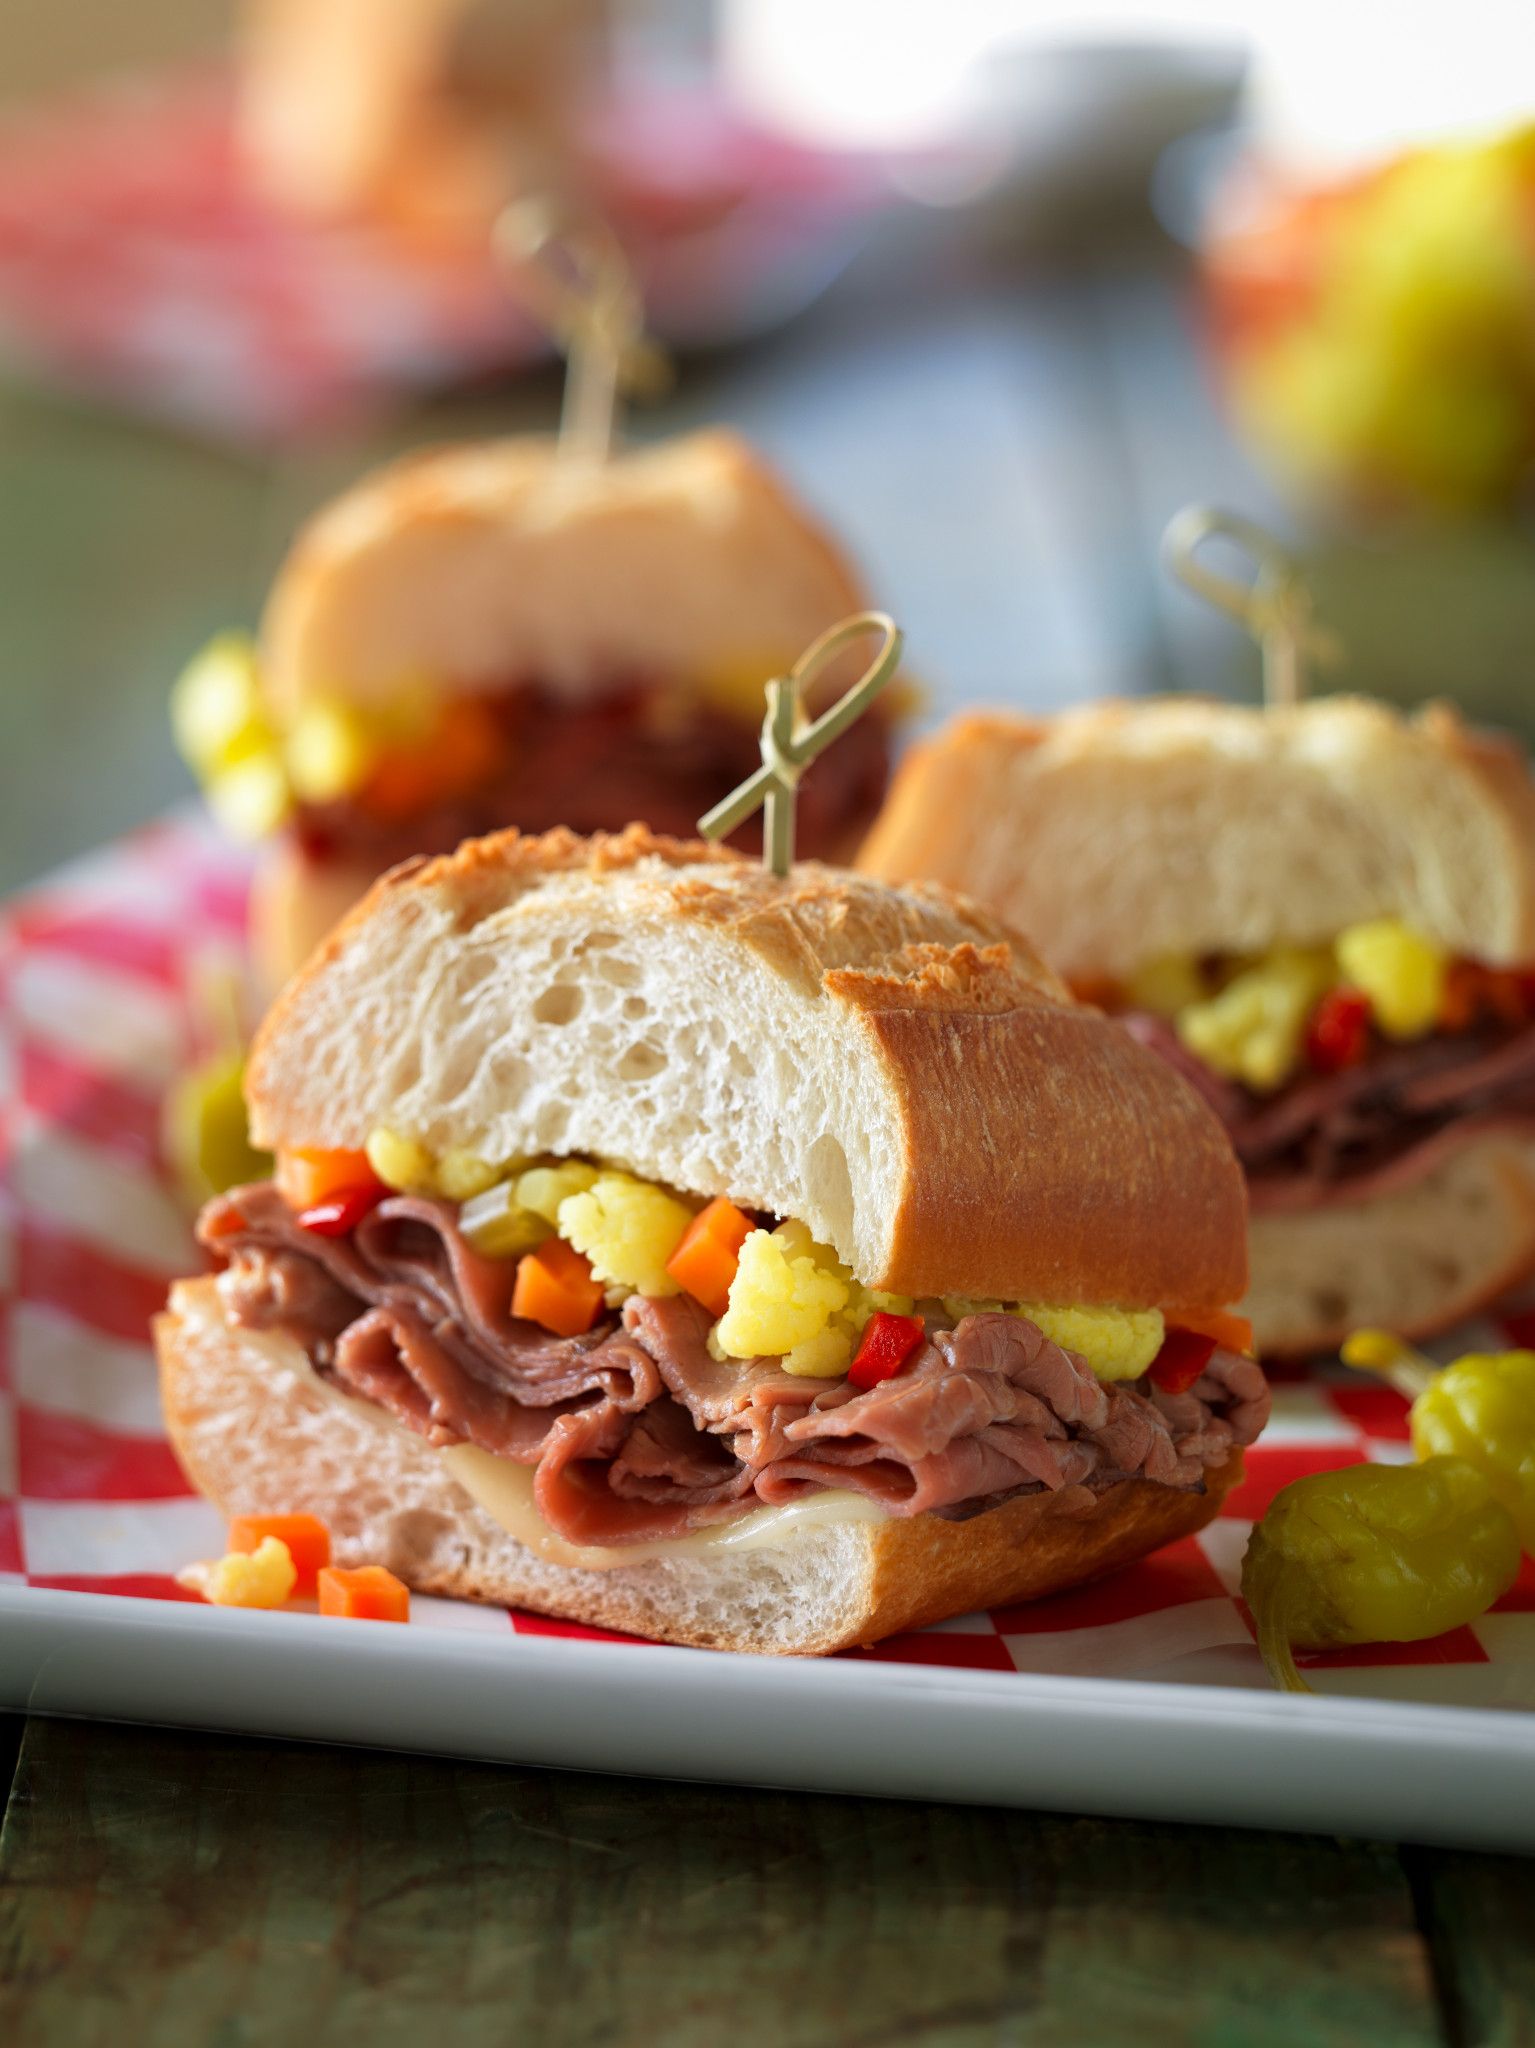 Chicago-Style Italian Beef Sandwiches | Beef Loving Texans